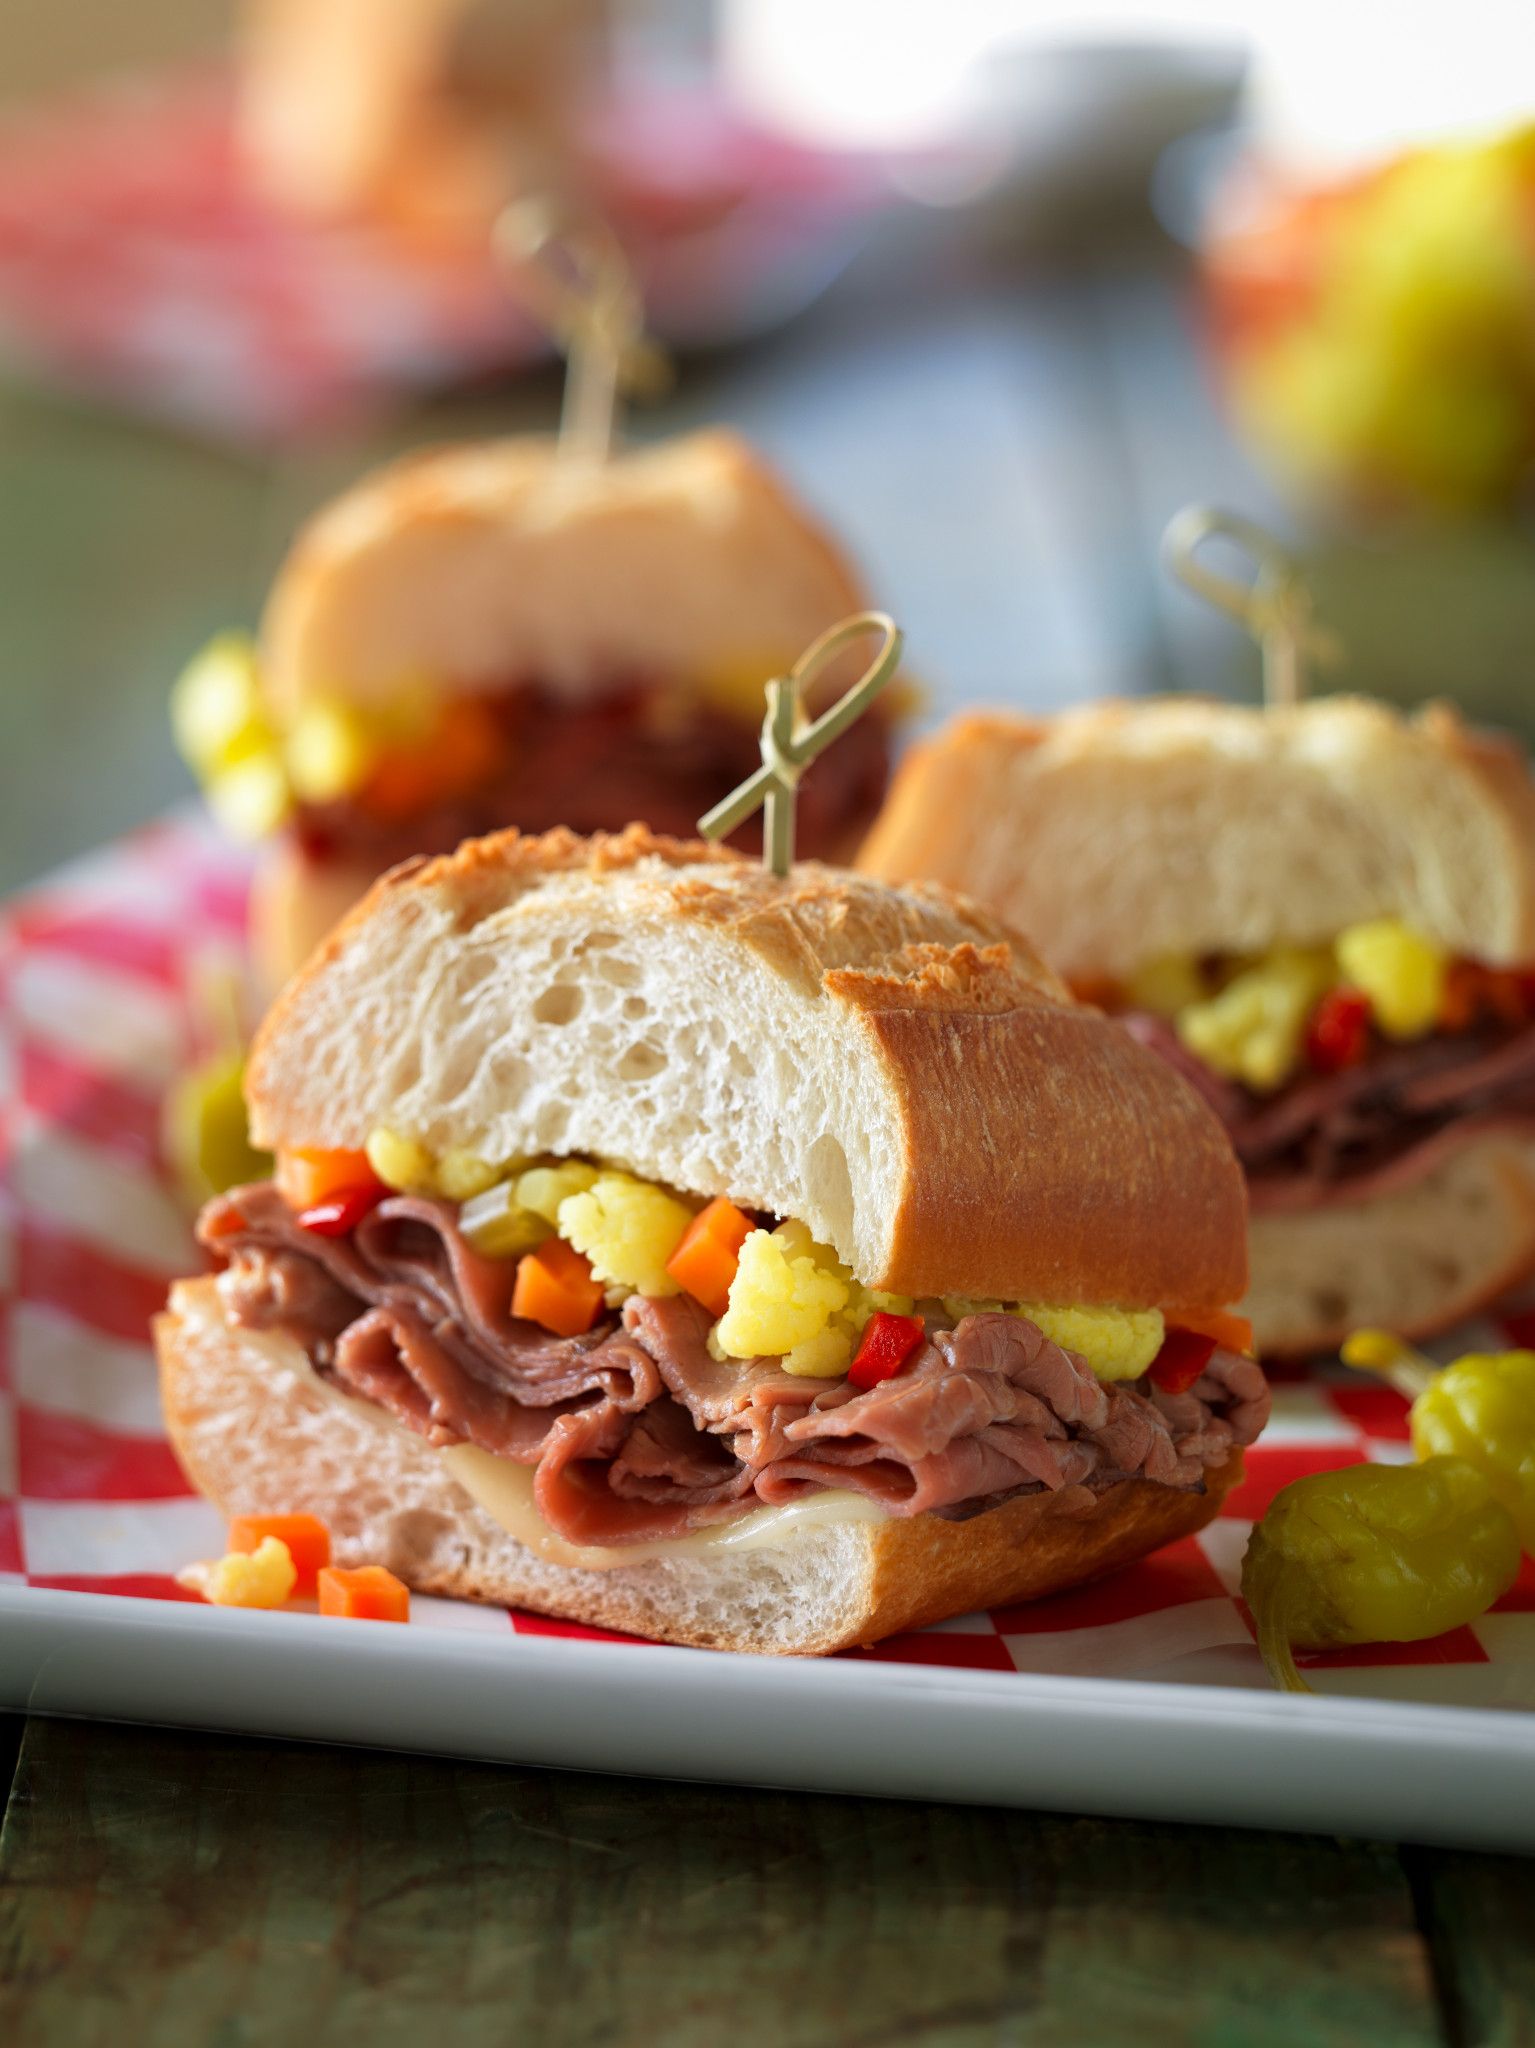 Chicago-Style Italian Beef Sandwiches | Beef Loving Texans